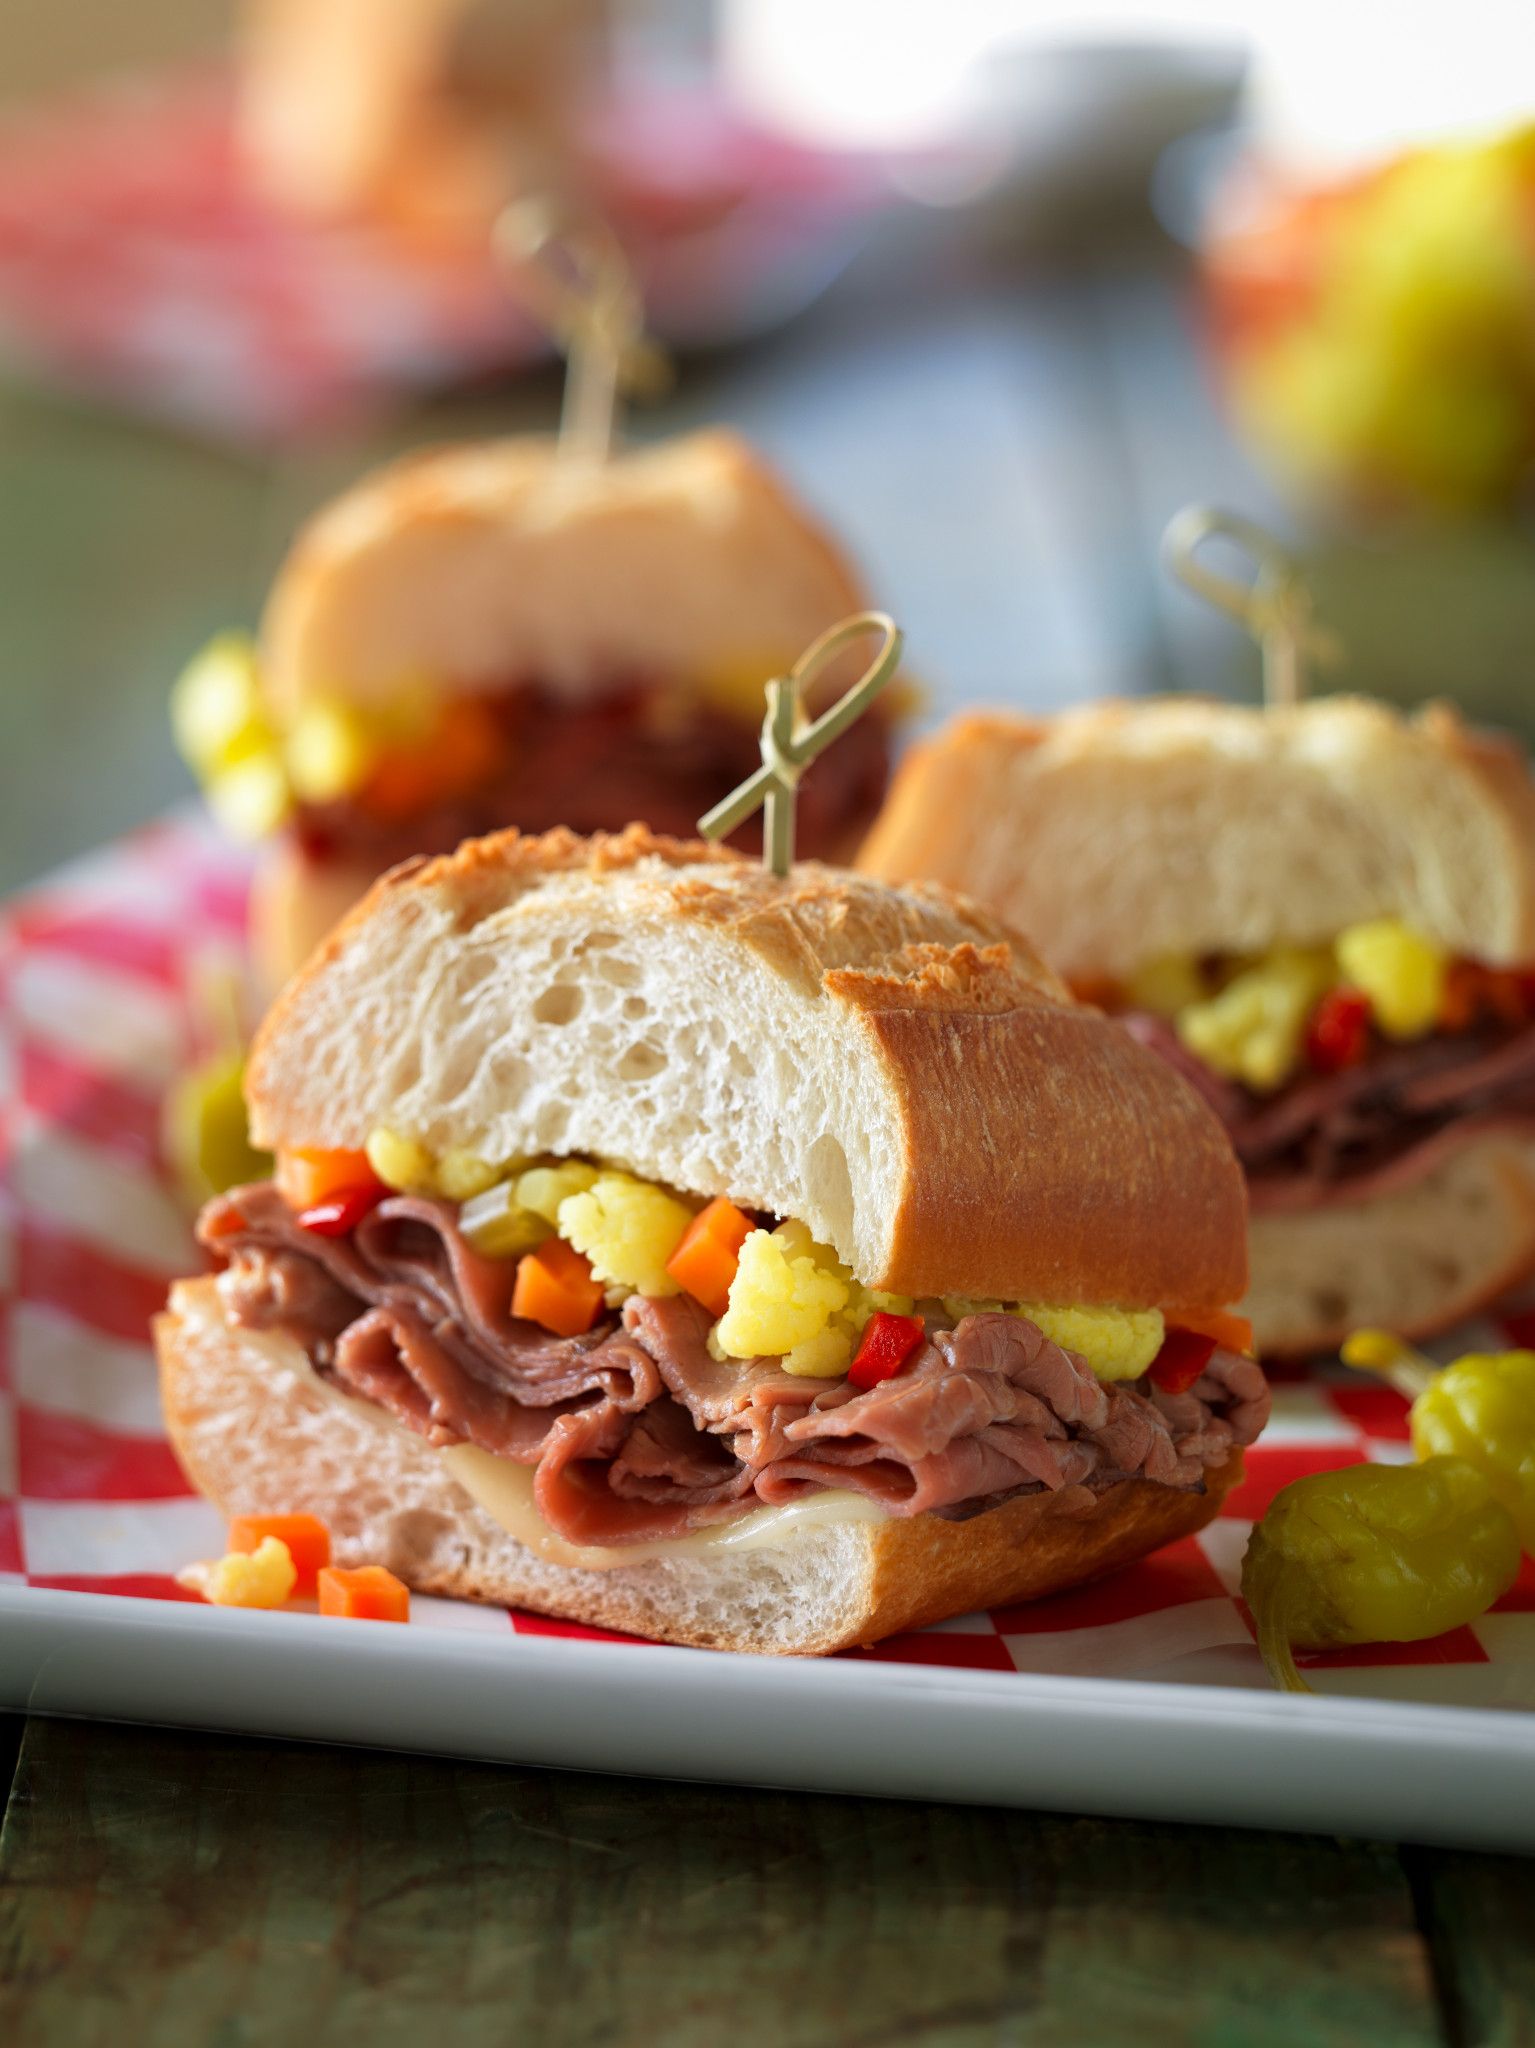 Chicago-Style Italian Beef Sandwiches | Beef Loving Texans